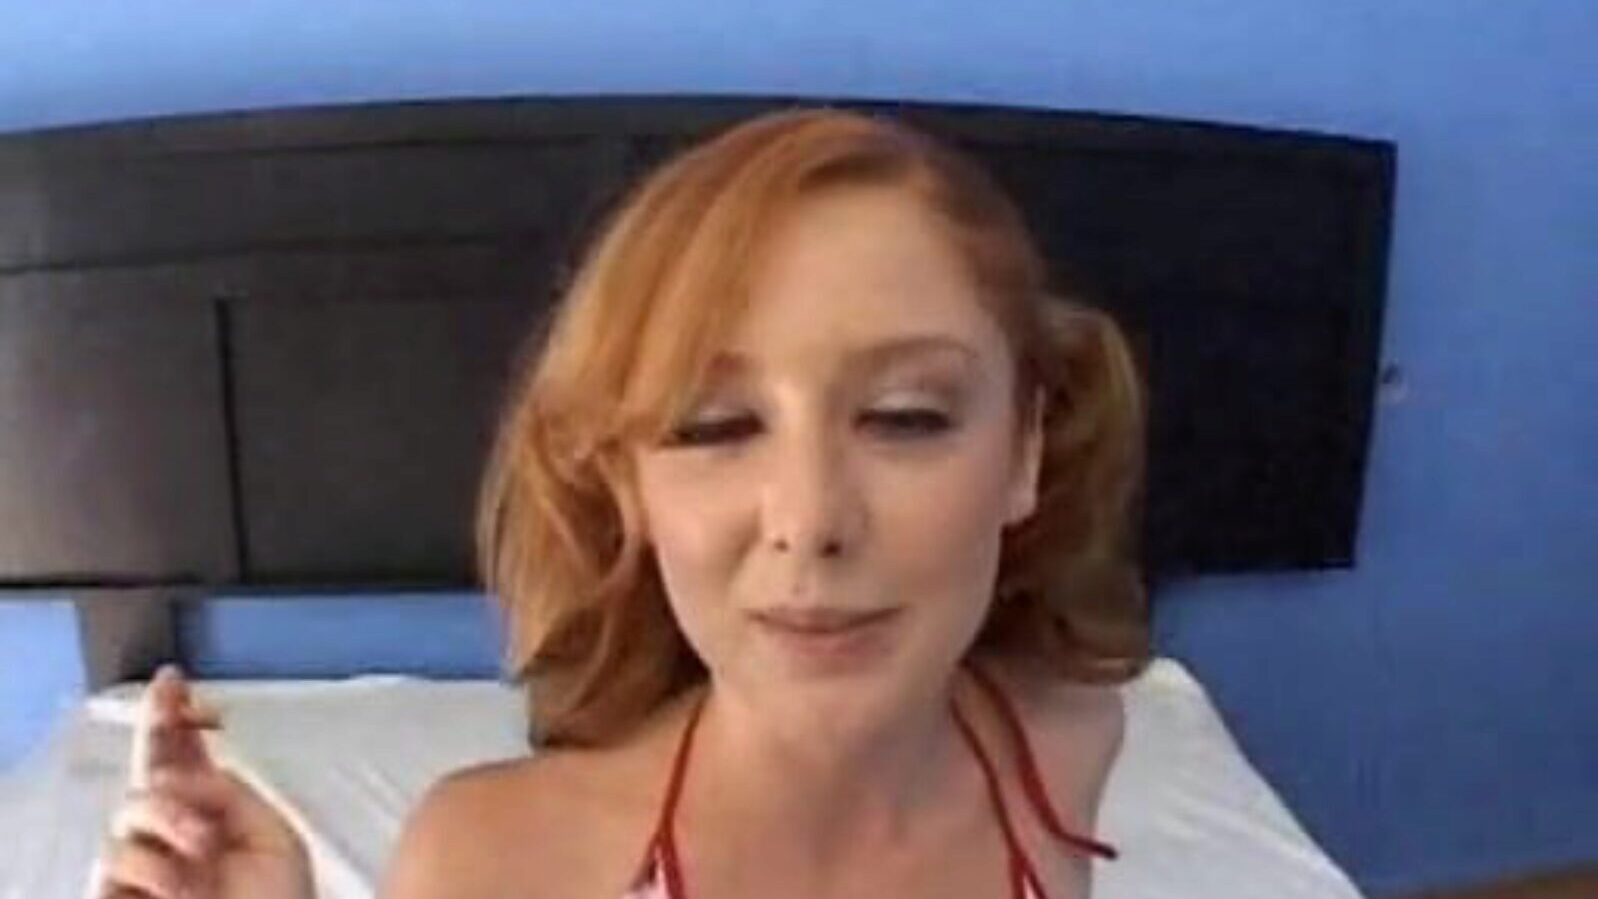 buttfuck sand-haired yeah I love me some redheads gettin assfucked this bitch is a skank too